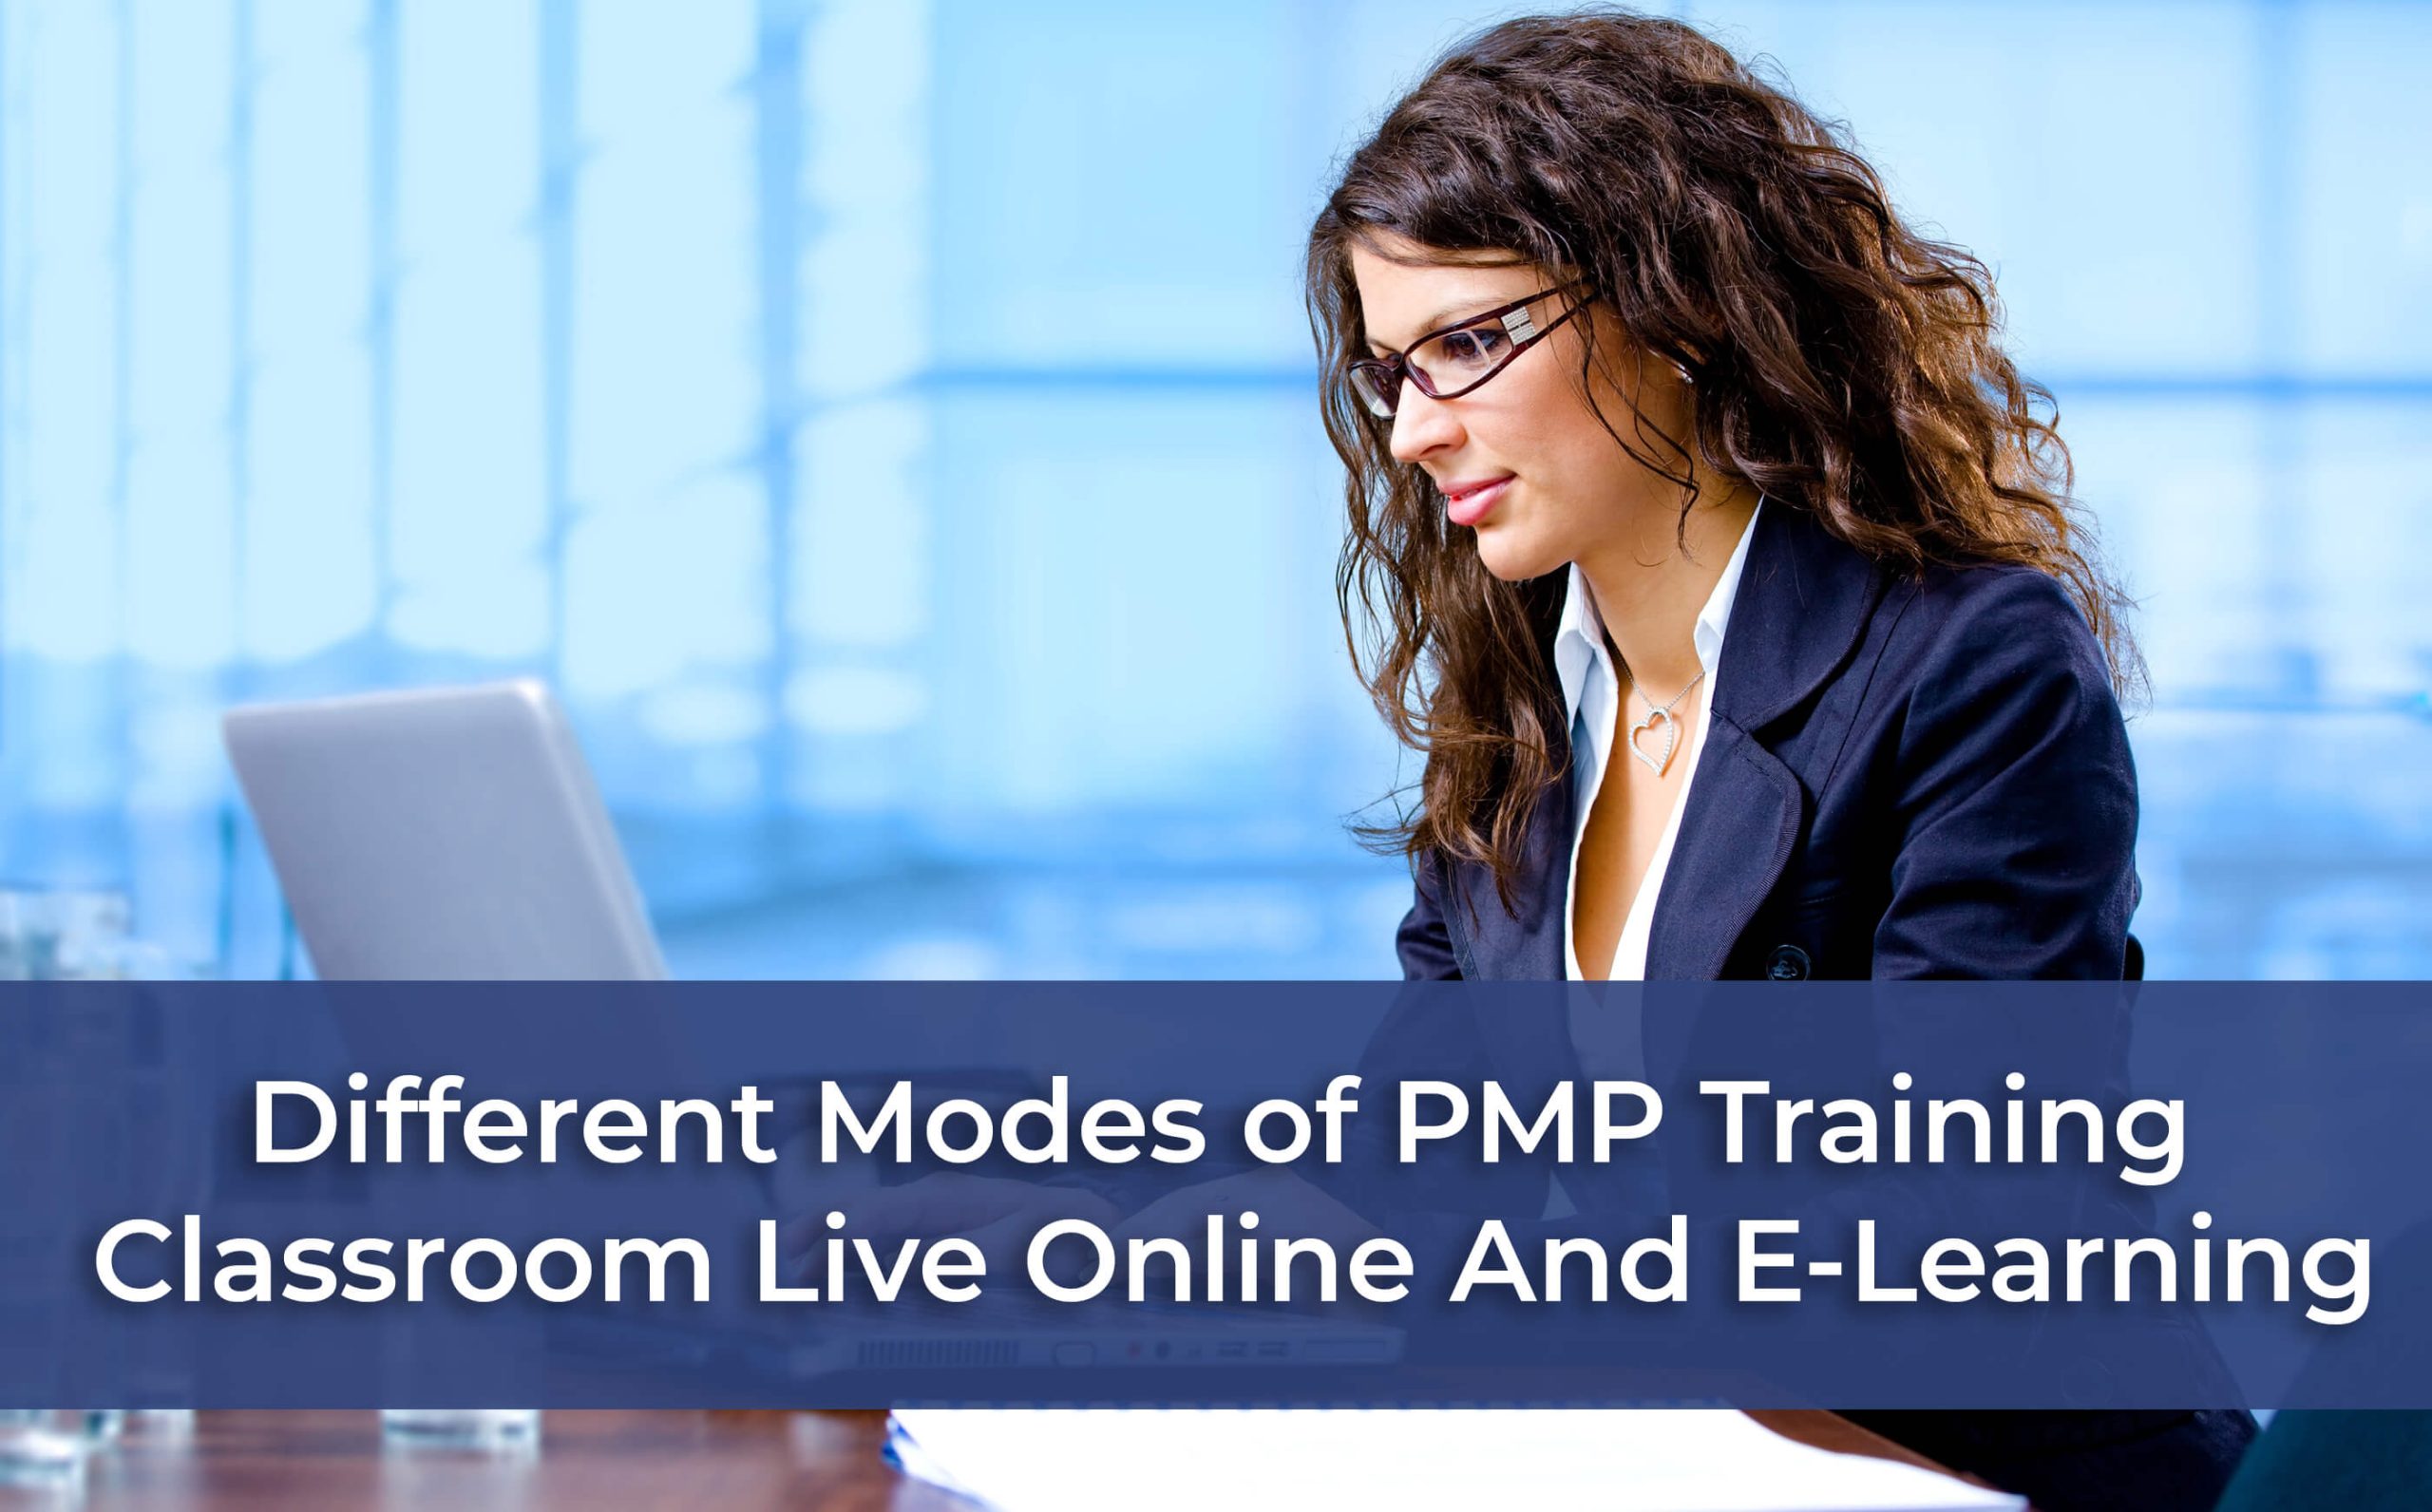 What Are The Modes Of PMP Training?